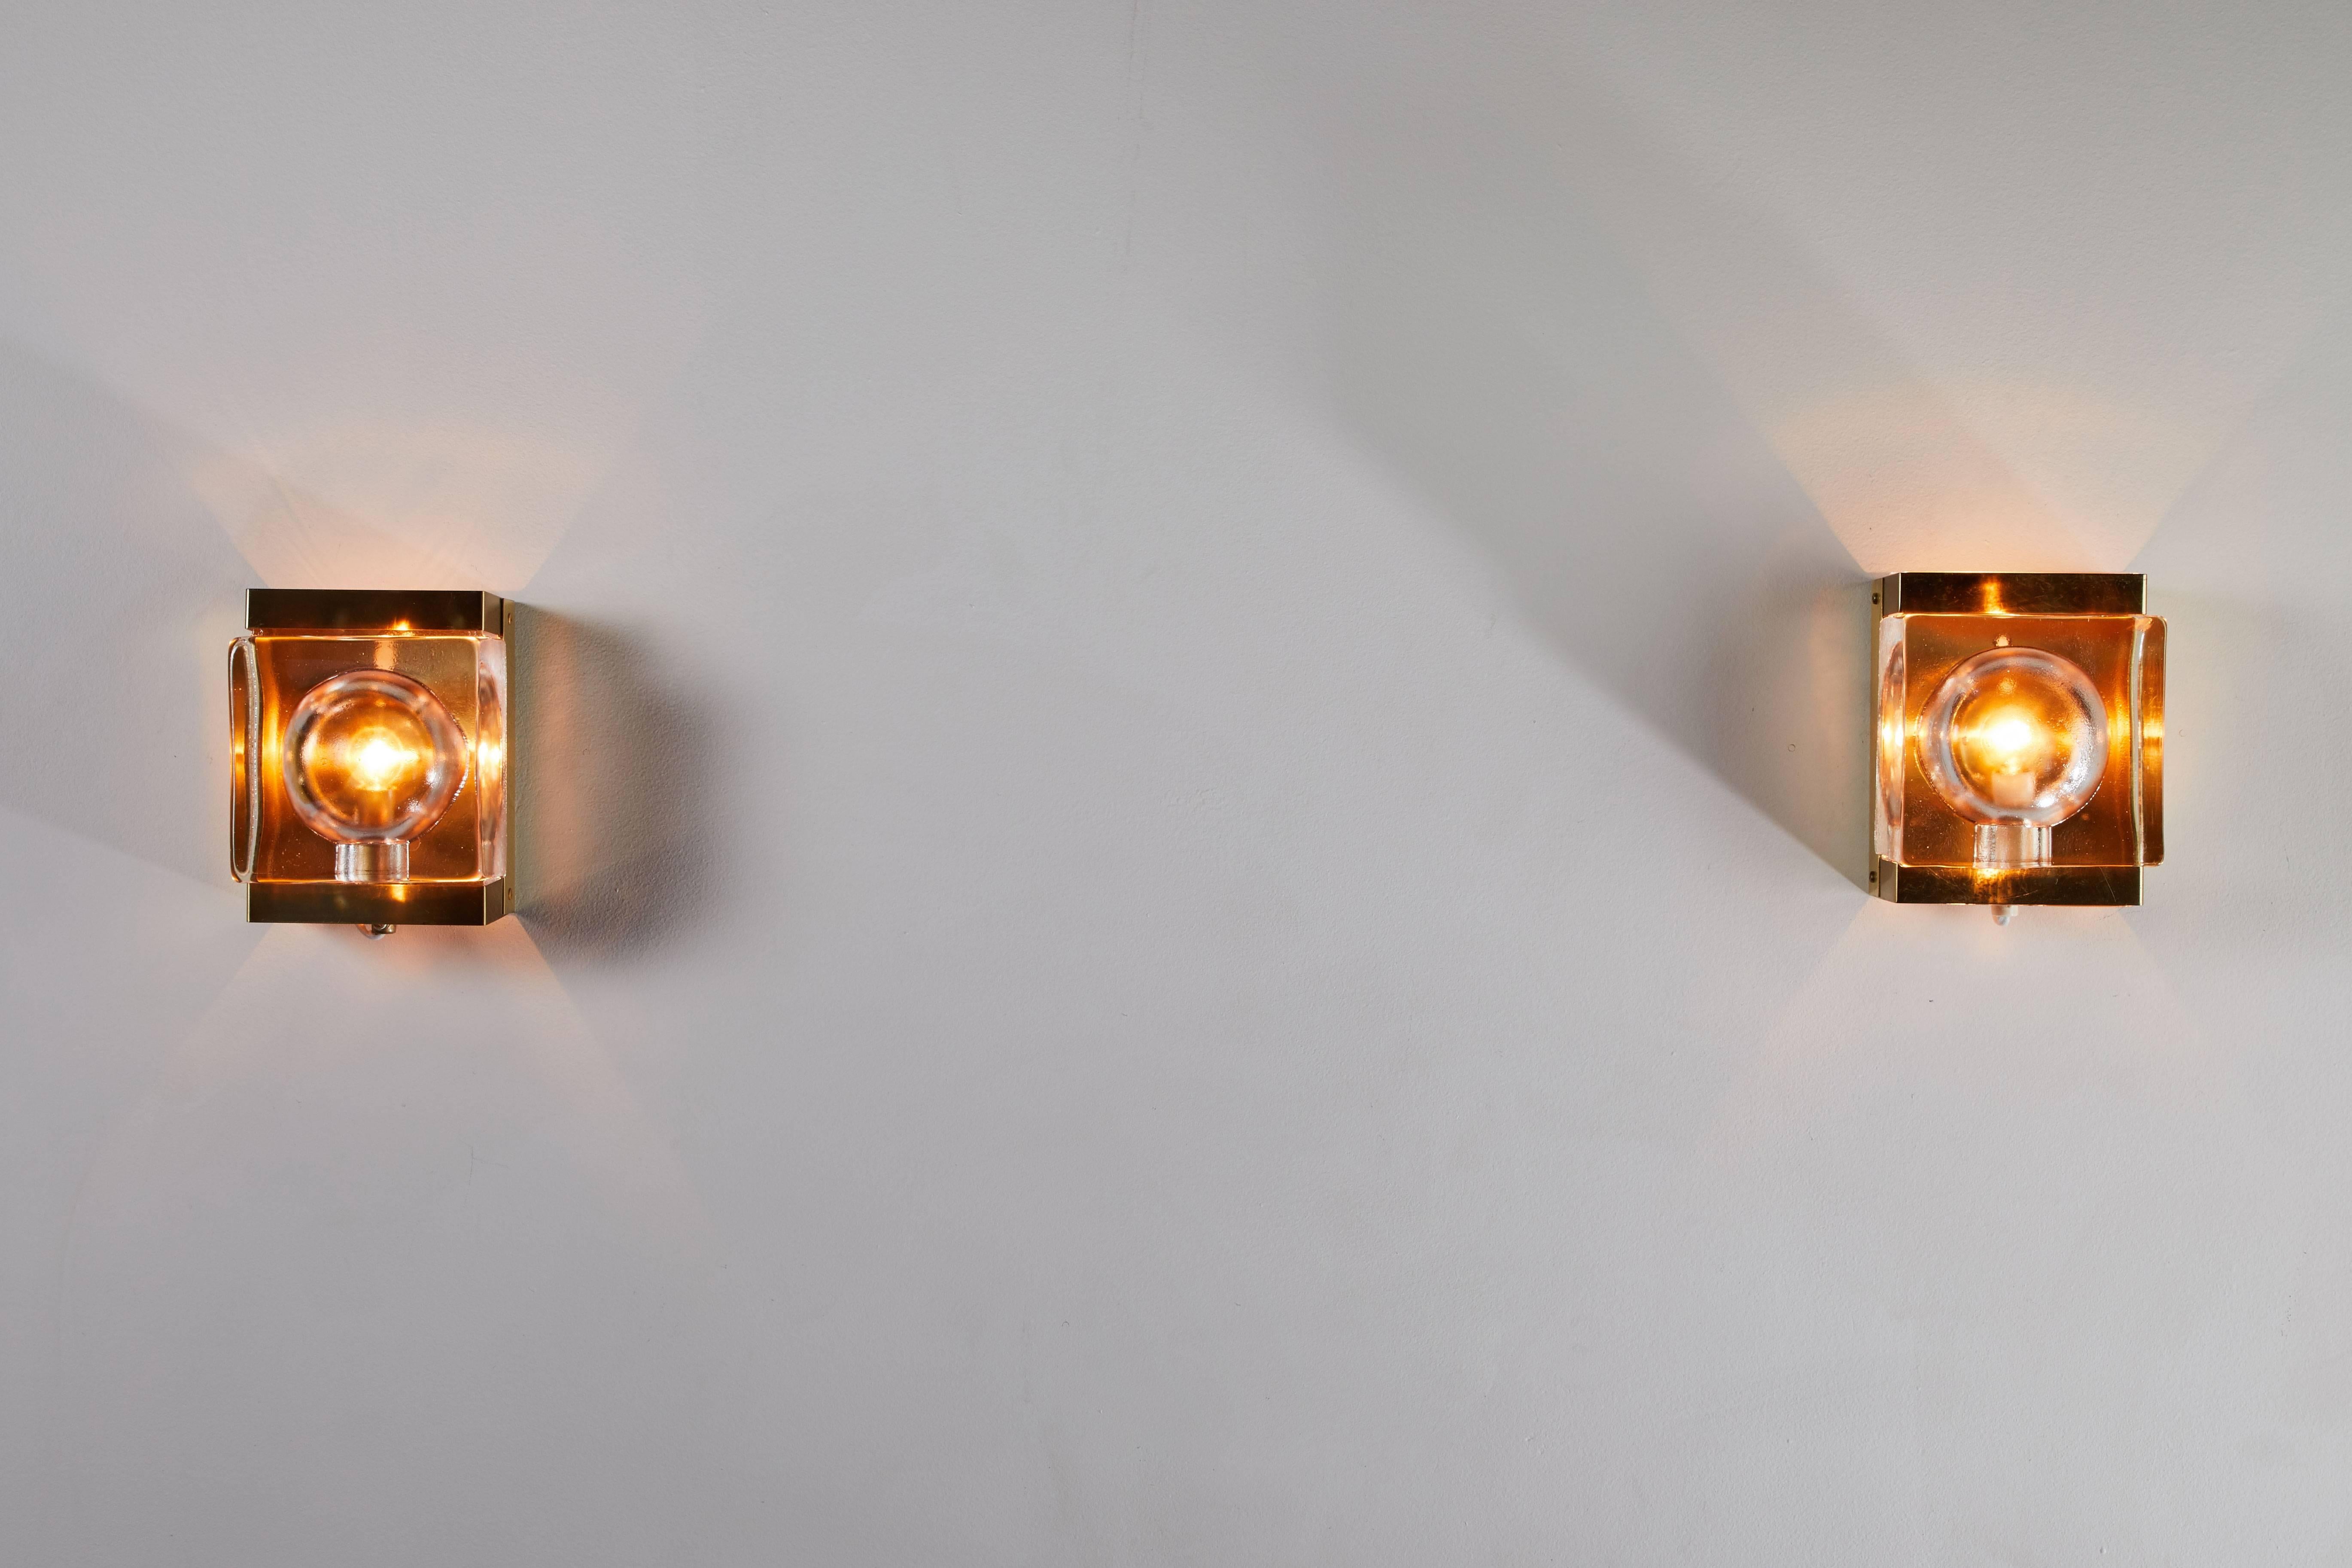 Two maritime style sconces manufactured by Vitrika in Denmark, circa 1960s. Brass and molded glass. Wired for US junction boxes. Maintains original manufacturer's label. Each sconce takes one E14 40w maximum bulb. Priced individually.